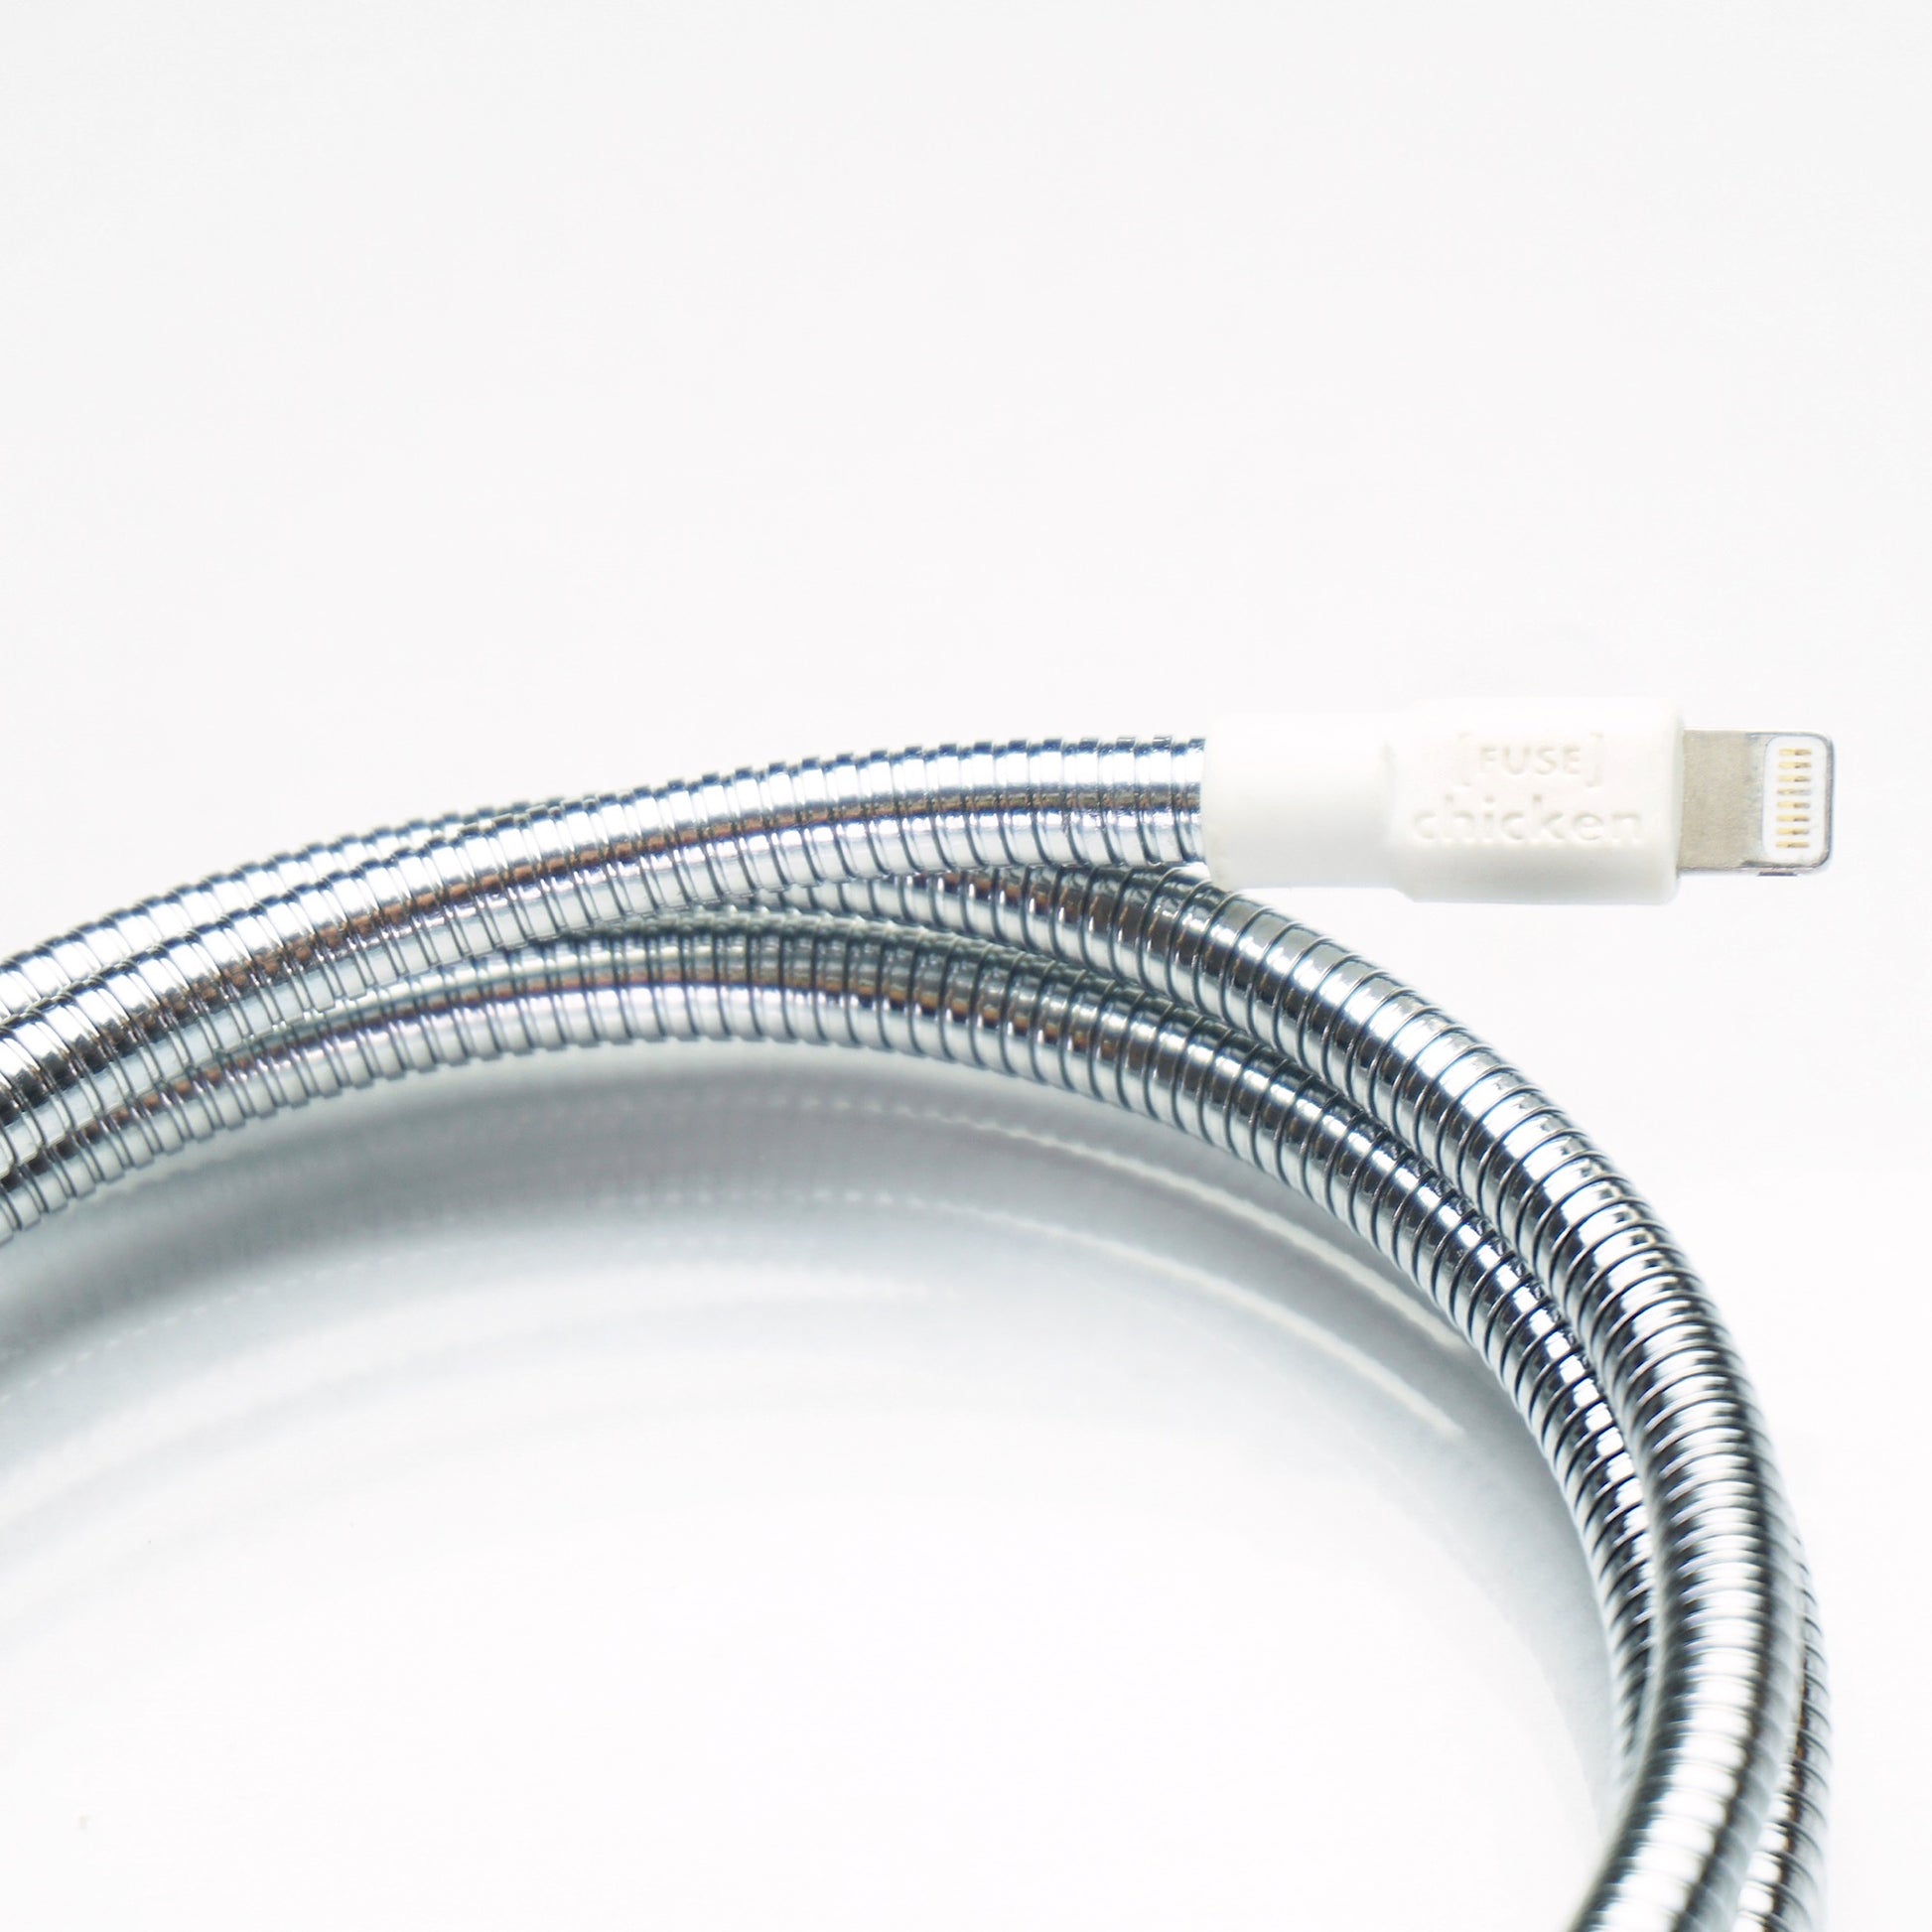 No More Frayed iPhone Cables! TITAN is The Toughest Cable on Earth